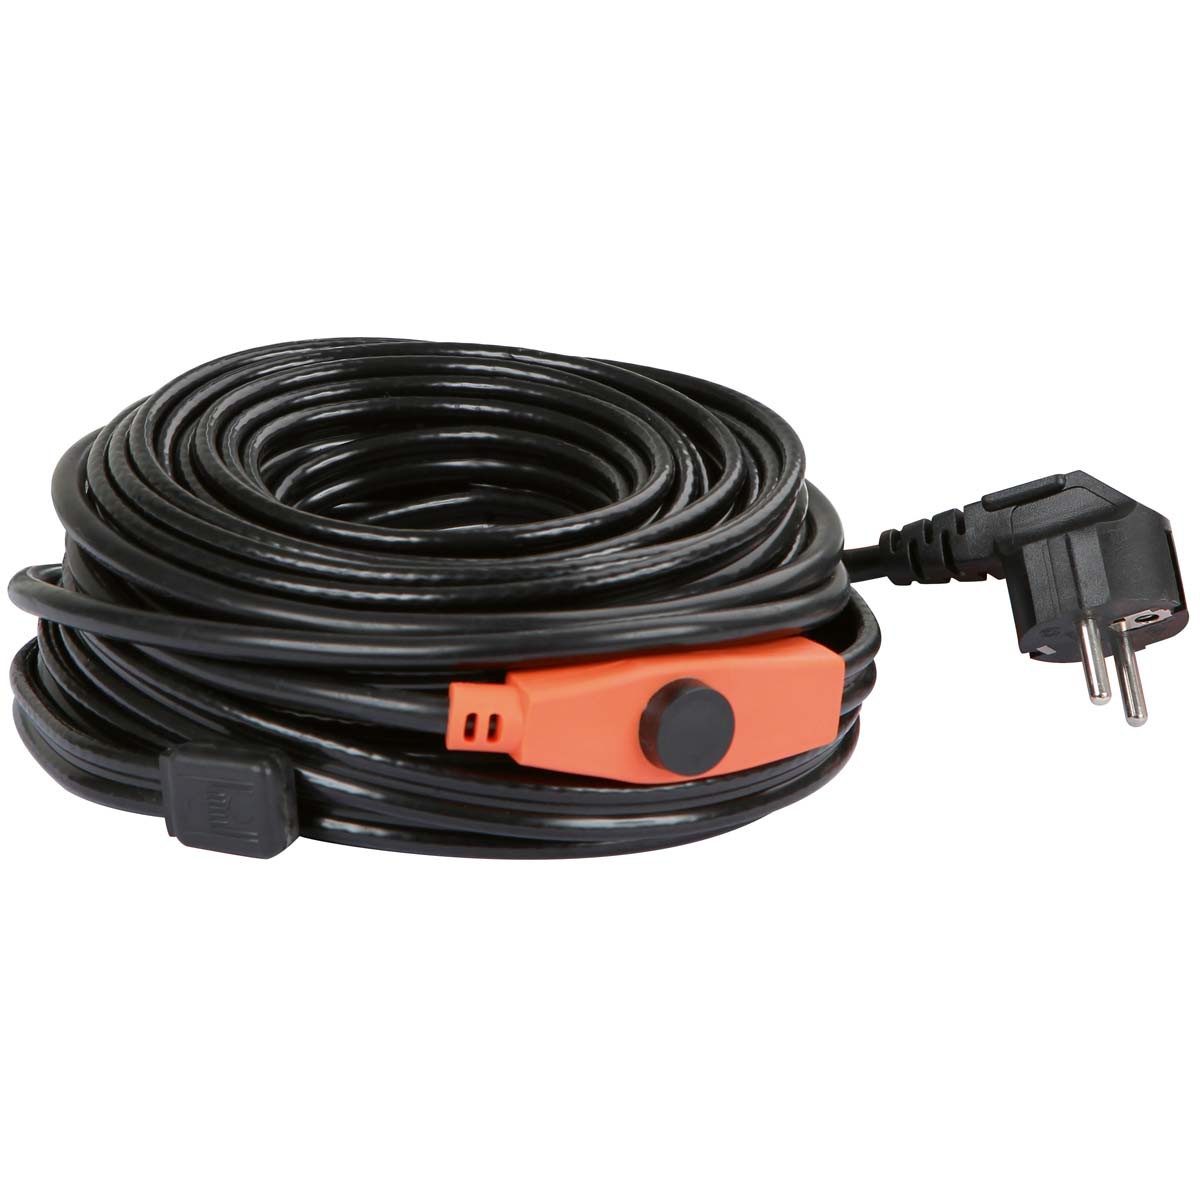 Frost-protection heating cable with thermostat 230V